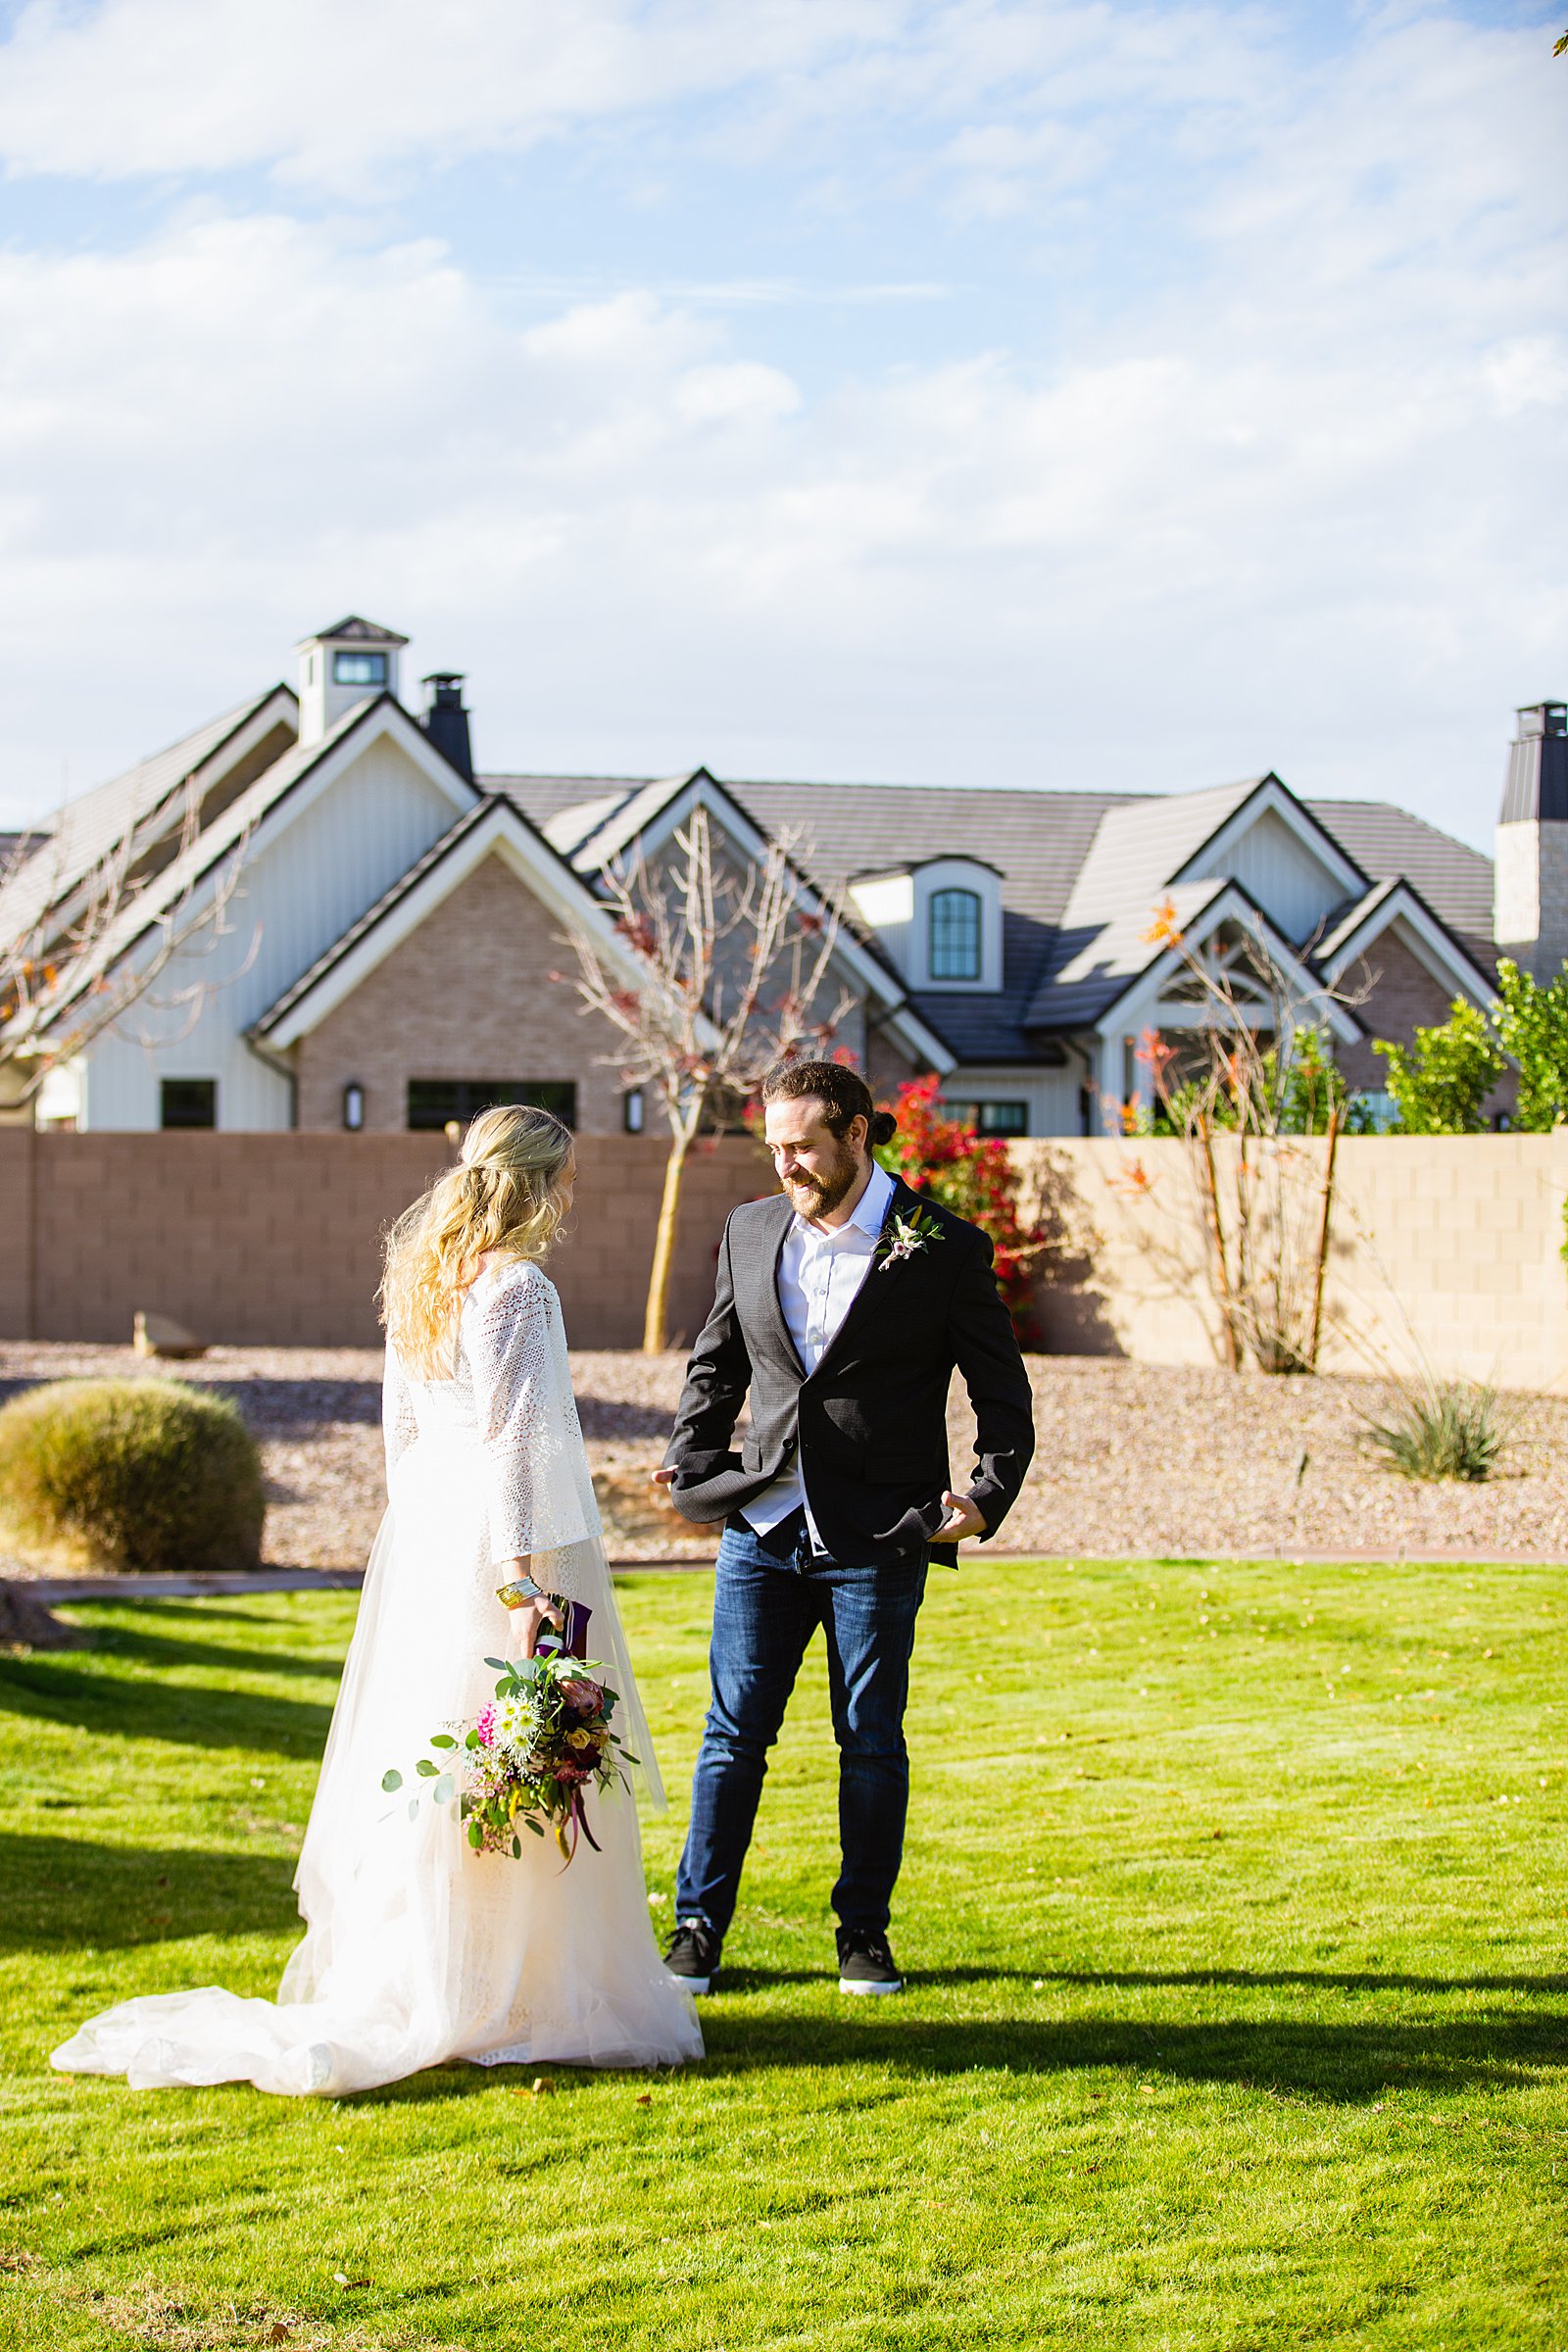 Bride and Groom's first look for their backyard wedding by Phoenix wedding photographer PMA Photography.